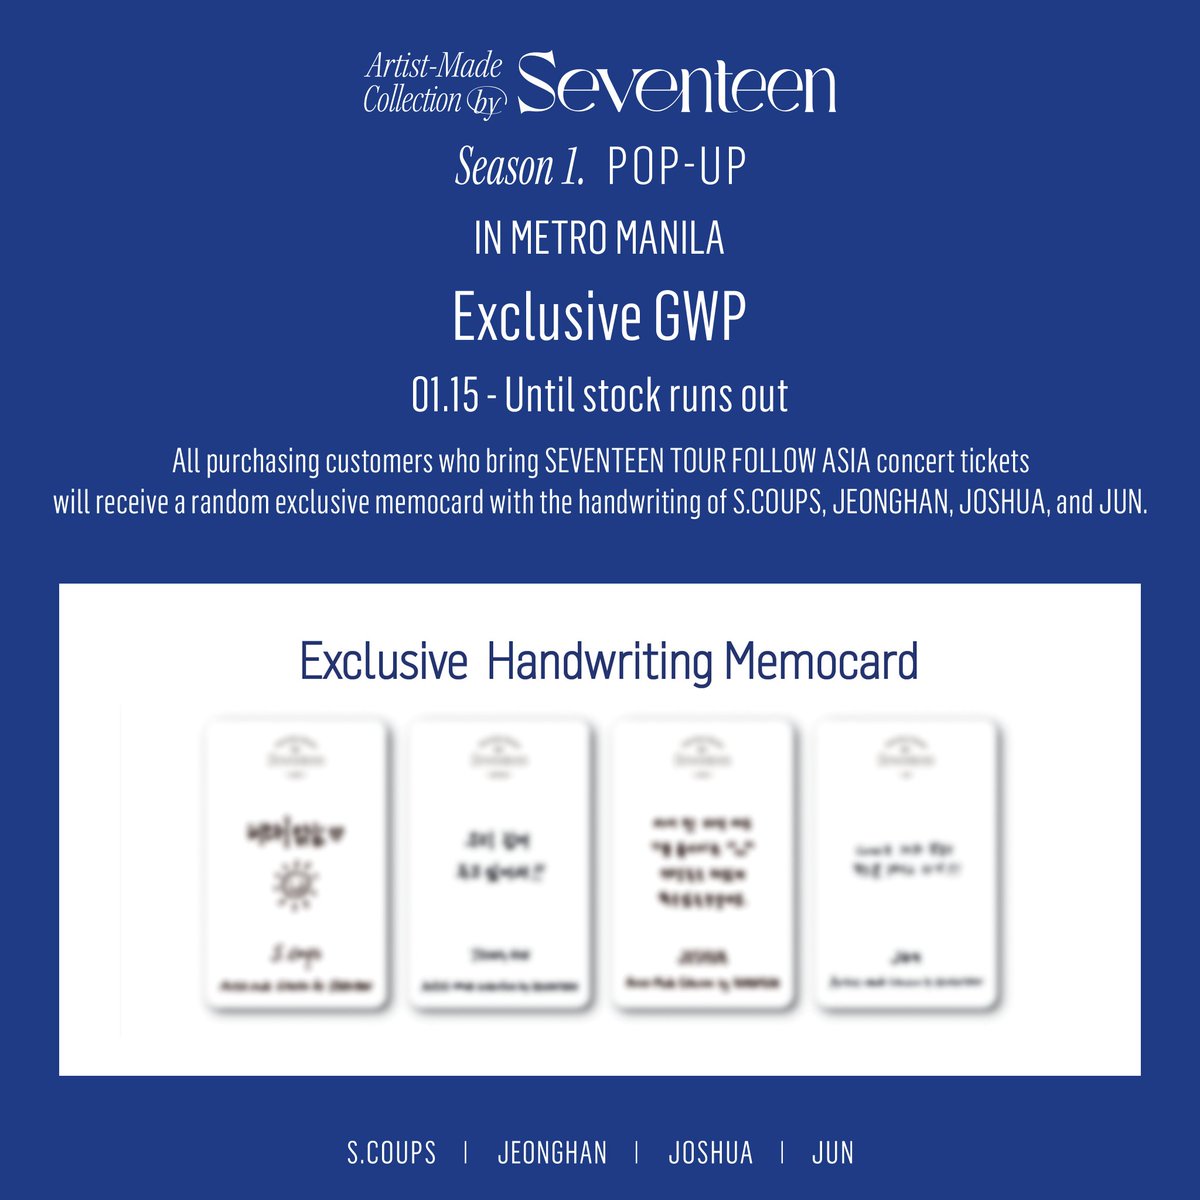 [Artist-Made Collection by SEVENTEEN Season 1. POP-UP in METRO MANILA] Get random exclusive handwriting memocard in store. Just present your SEVENTEEN TOUR FOLLOW ASIA concert ticket Event Duration: 15 January - Until stock runs out #SEVENTEEN #세븐틴 #bySEVENTEEN